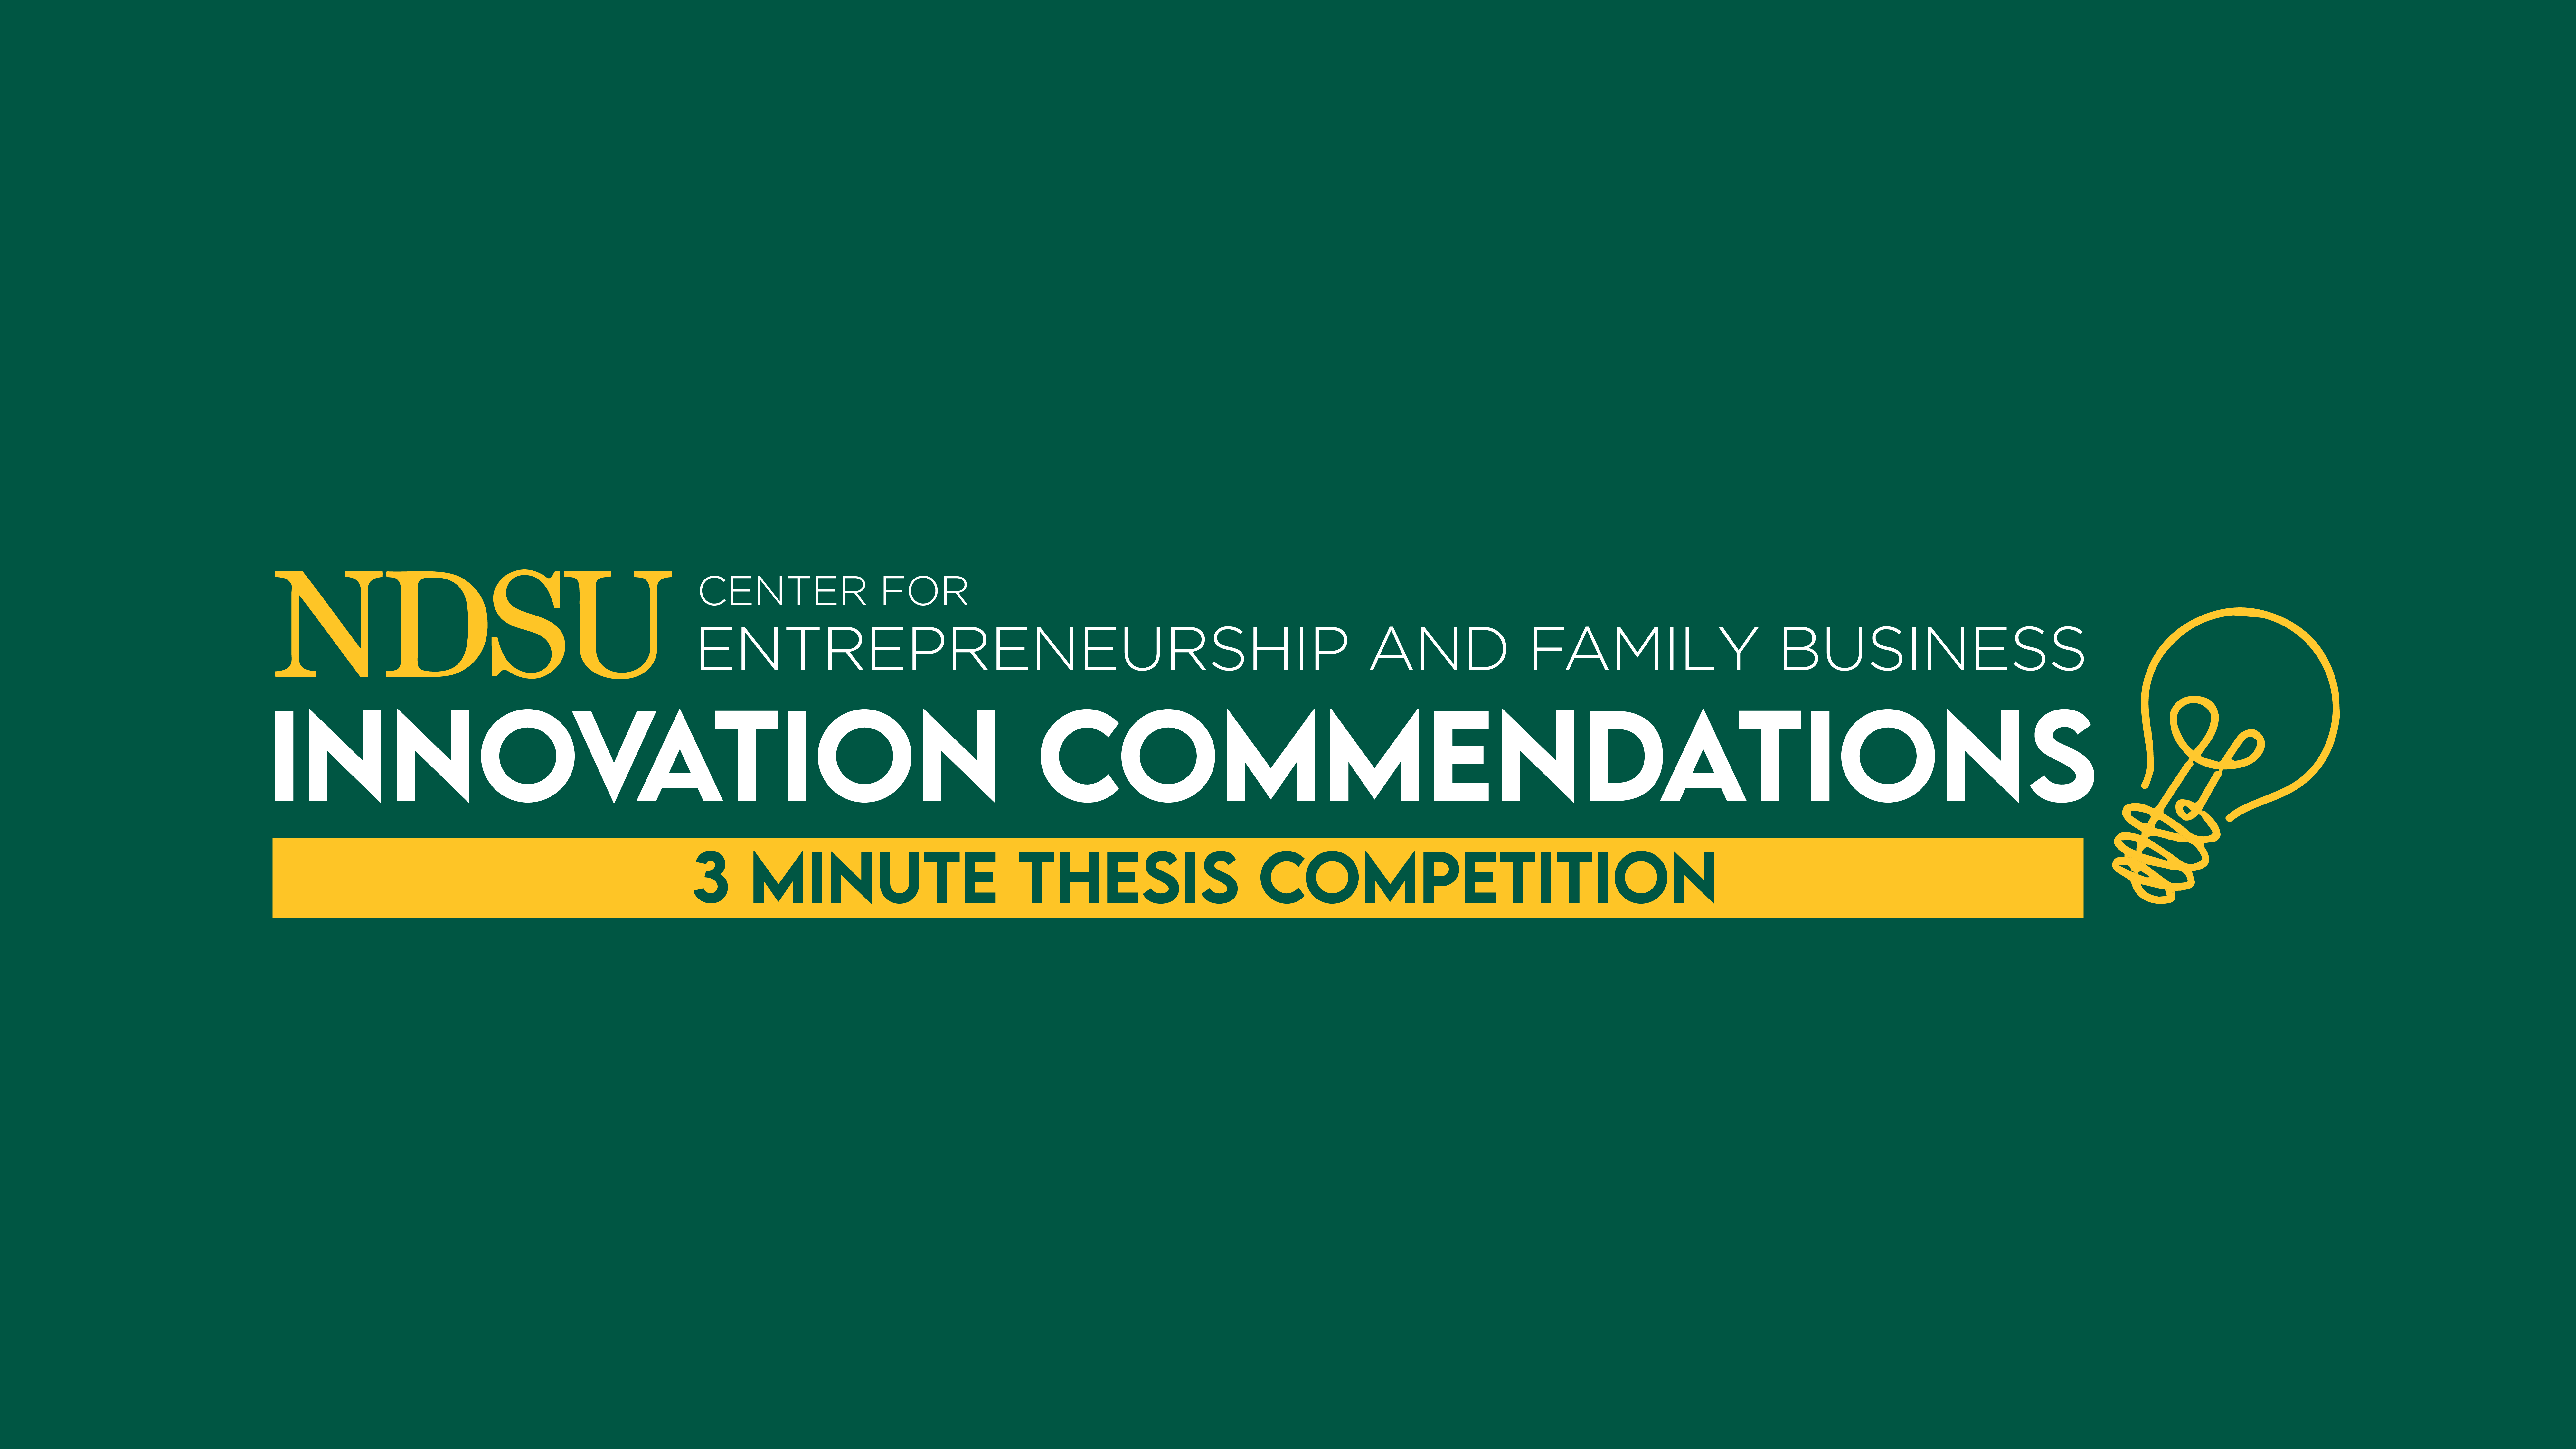 Four students earn Innovation Commendations